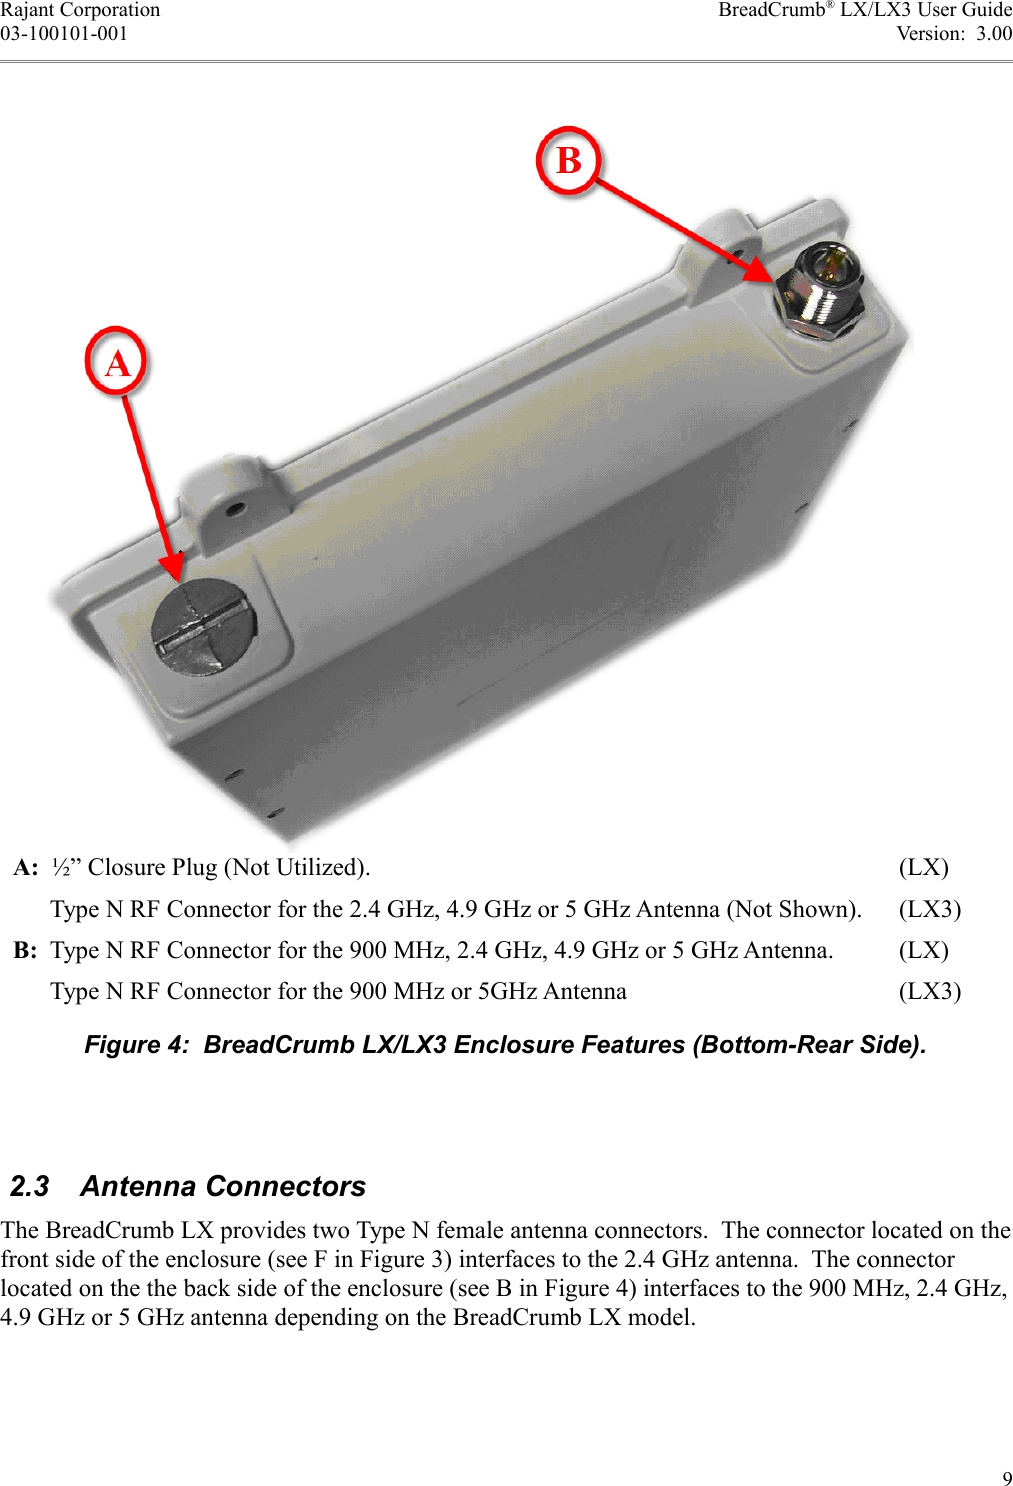 Rajant Corporation BreadCrumb® LX/LX3 User Guide03-100101-001 Version:  3.00 2.3  Antenna ConnectorsThe BreadCrumb LX provides two Type N female antenna connectors.  The connector located on the front side of the enclosure (see F in Figure 3) interfaces to the 2.4 GHz antenna.  The connector located on the the back side of the enclosure (see B in Figure 4) interfaces to the 900 MHz, 2.4 GHz, 4.9 GHz or 5 GHz antenna depending on the BreadCrumb LX model.9A:  ½” Closure Plug (Not Utilized). (LX)      Type N RF Connector for the 2.4 GHz, 4.9 GHz or 5 GHz Antenna (Not Shown). (LX3)B:  Type N RF Connector for the 900 MHz, 2.4 GHz, 4.9 GHz or 5 GHz Antenna. (LX)      Type N RF Connector for the 900 MHz or 5GHz Antenna (LX3)Figure 4:  BreadCrumb LX/LX3 Enclosure Features (Bottom-Rear Side).